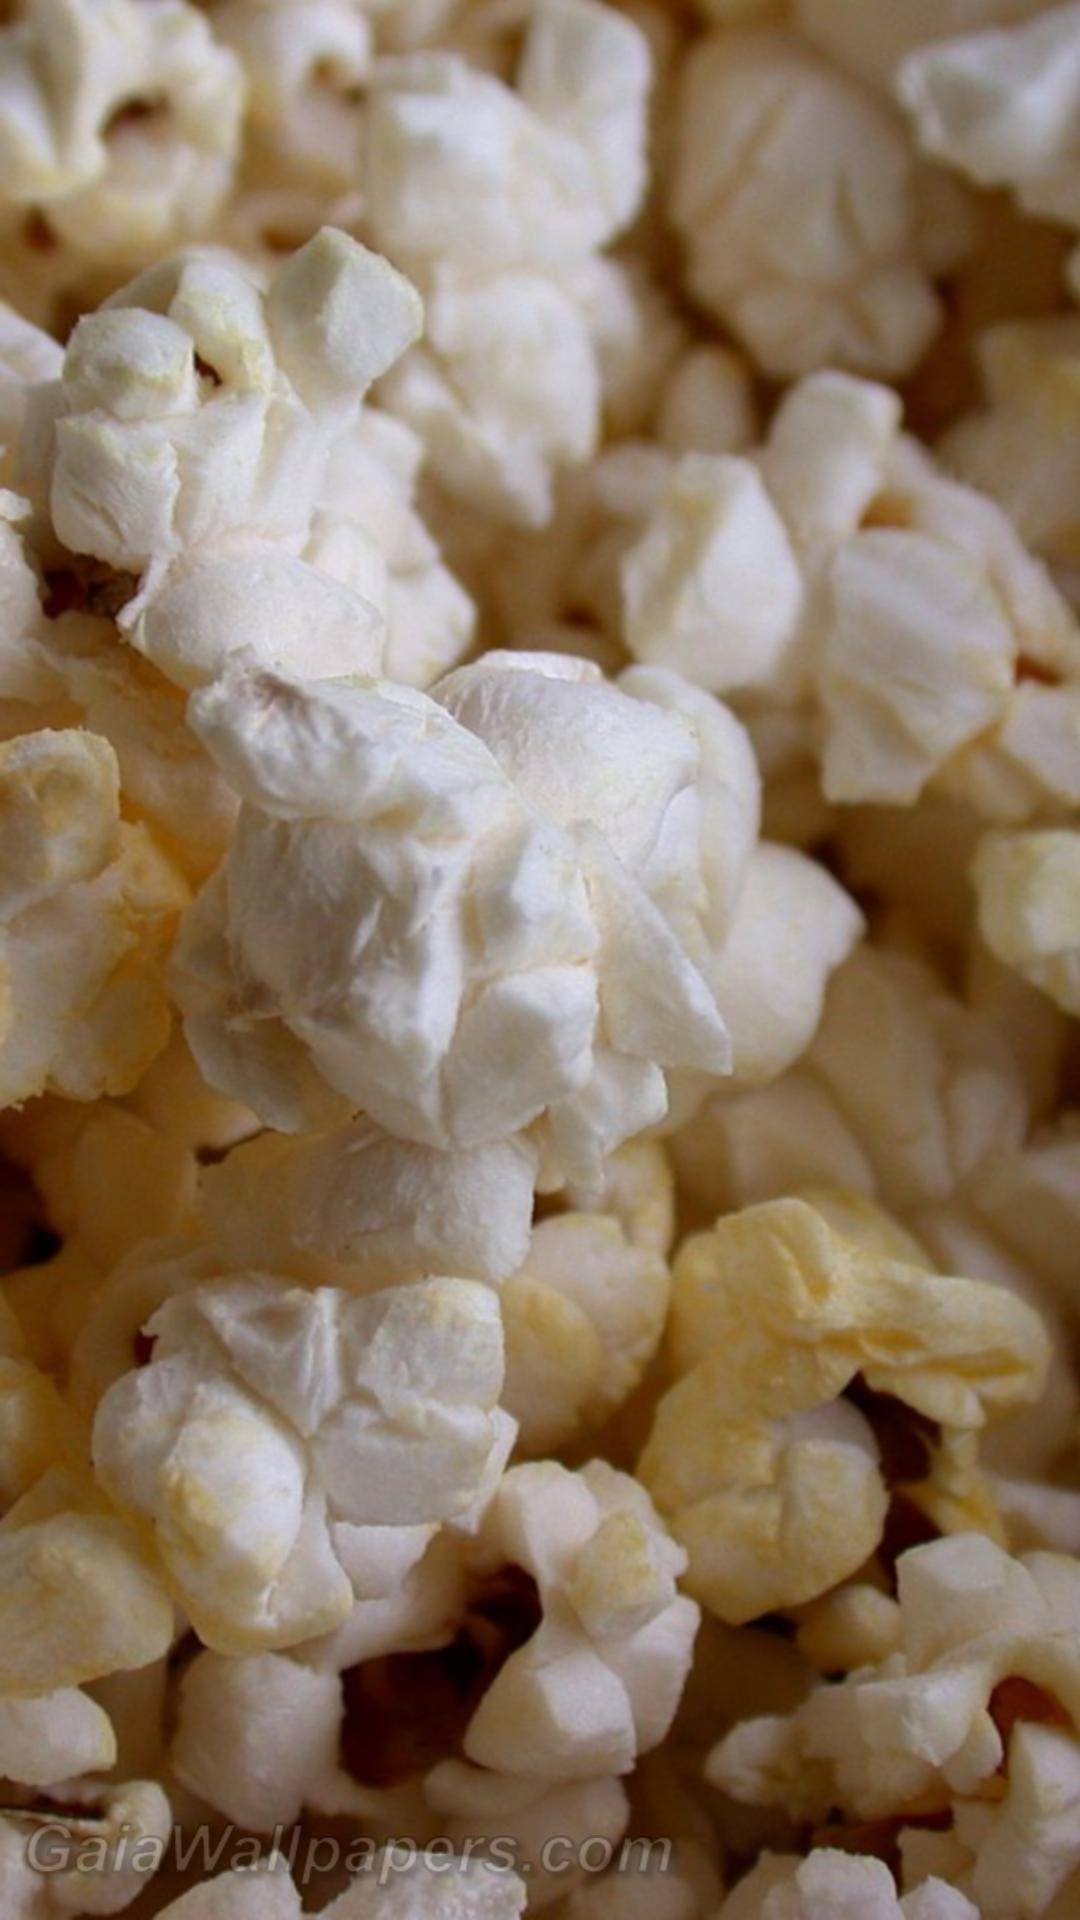 Free popcorn wallpapers, High-definition images, Desktop background, Visual delight, 1080x1920 Full HD Handy